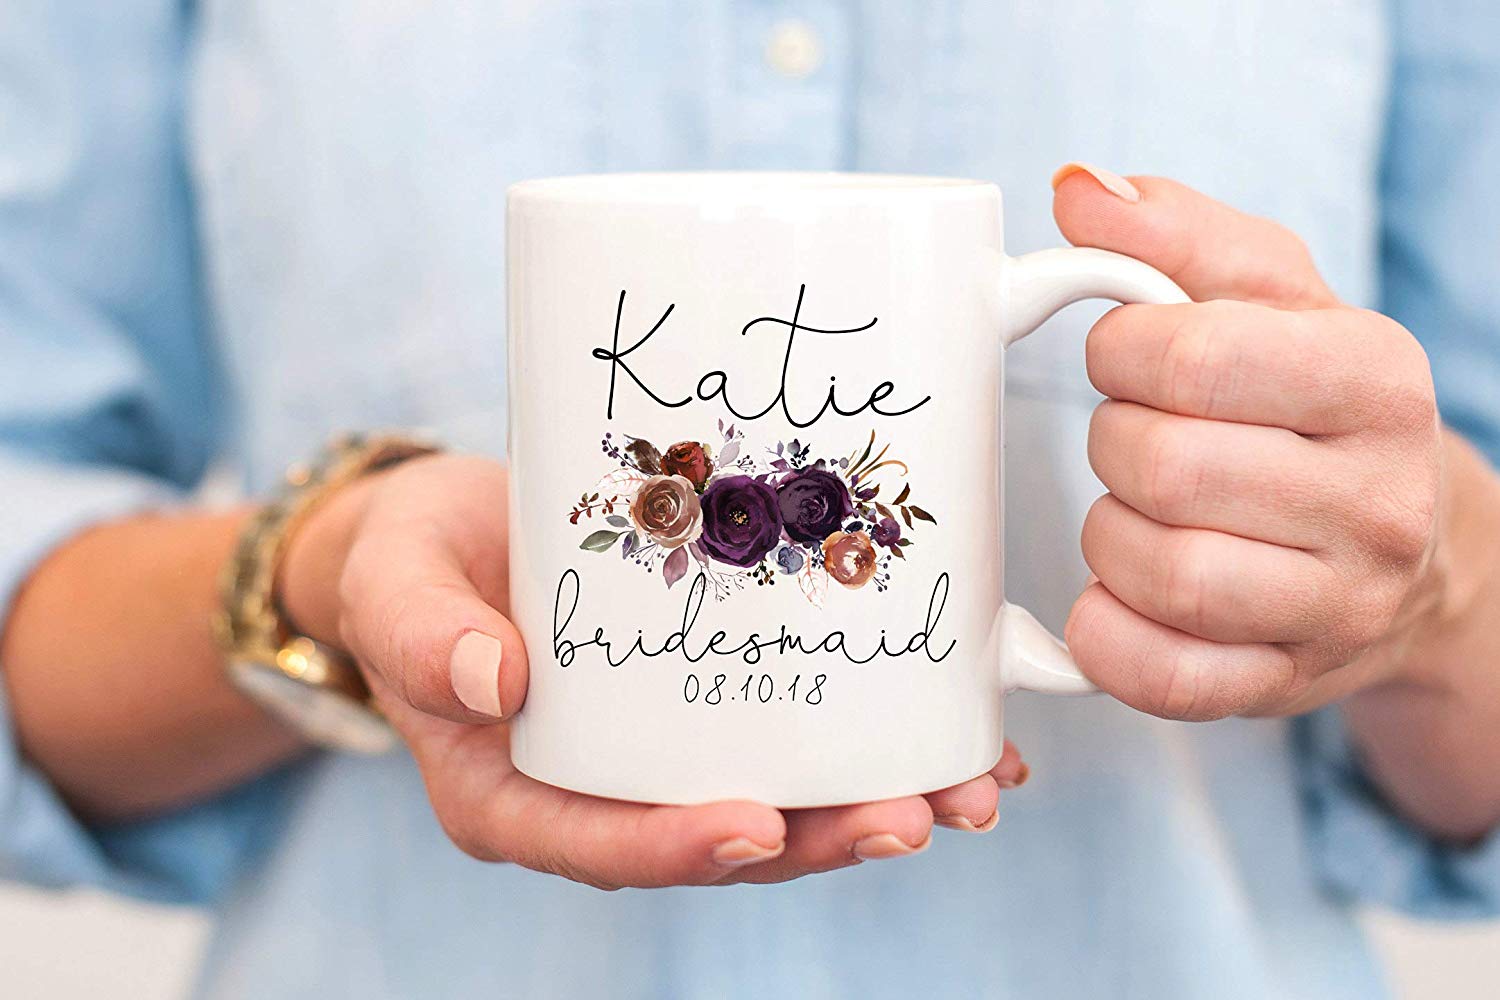 Affordable custom coffee mugs that you can gift people